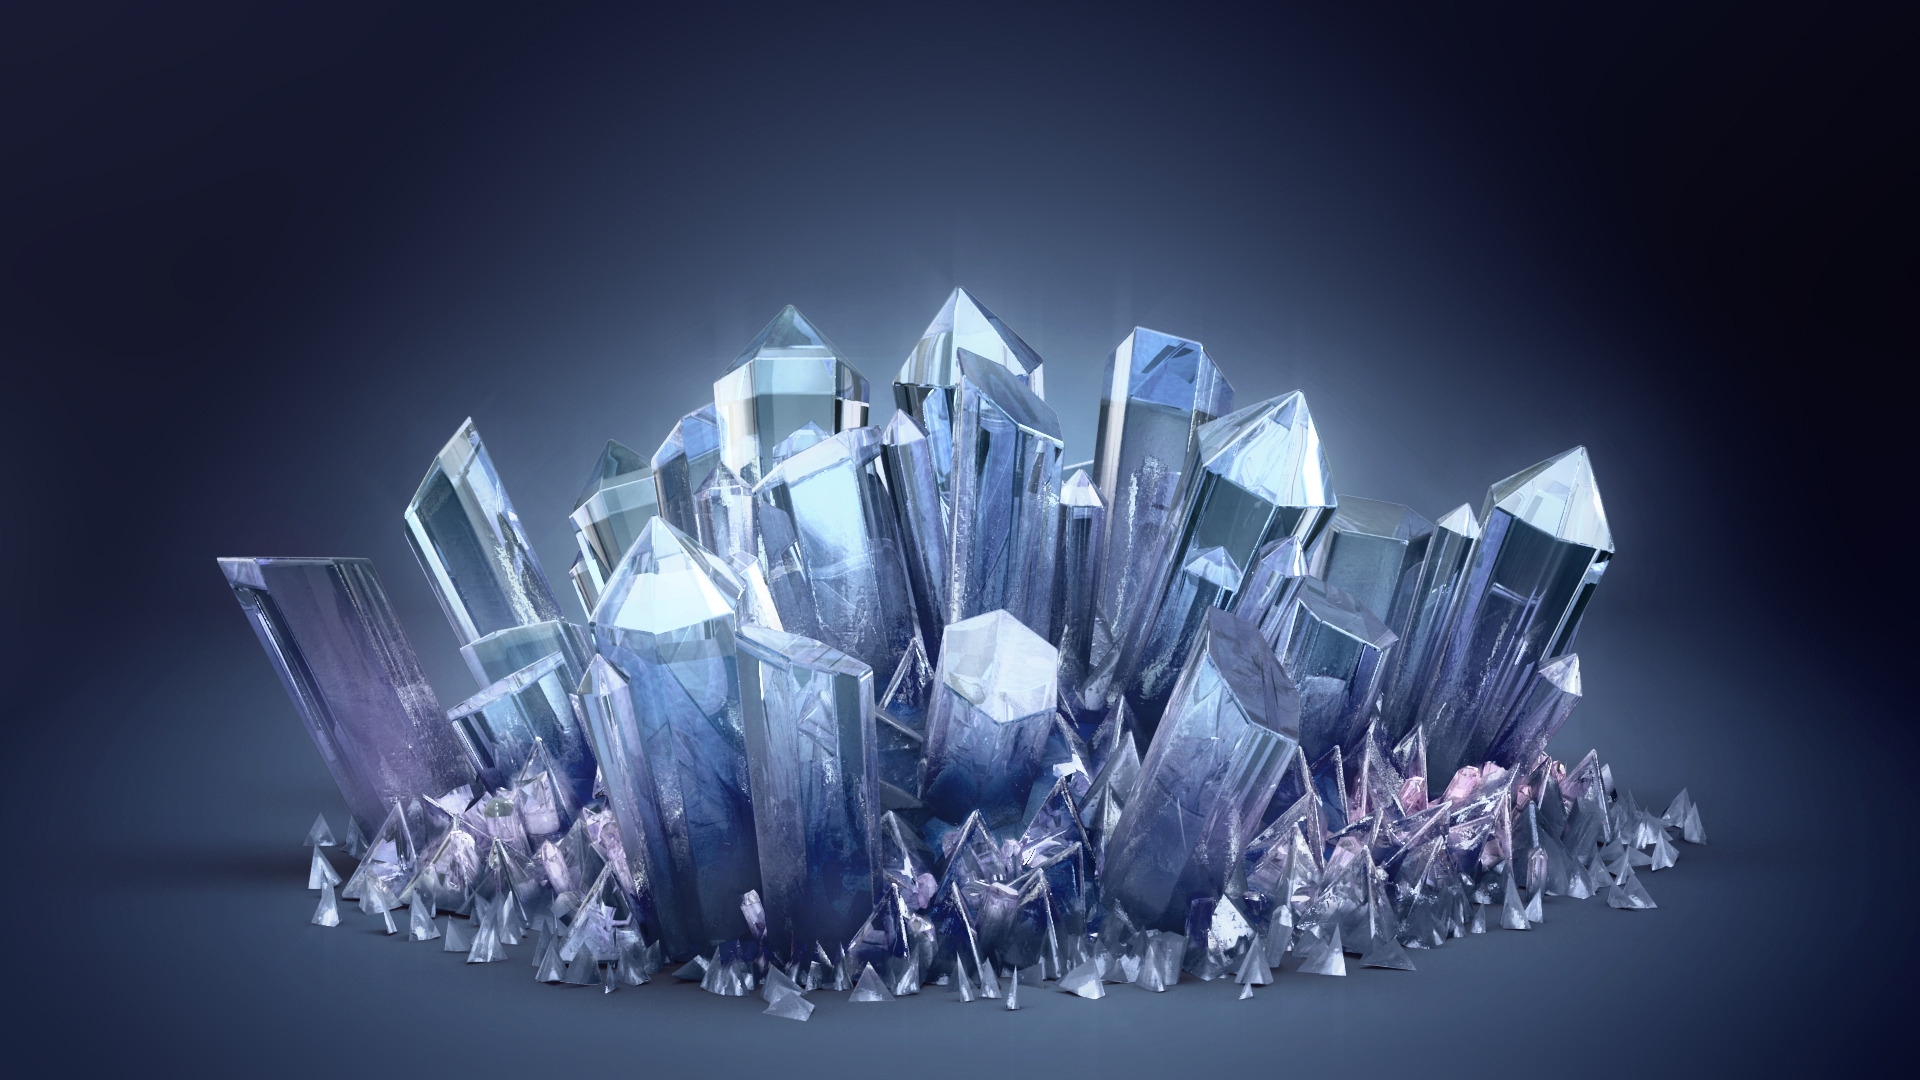 Crystals for 1920 x 1080 HDTV 1080p resolution